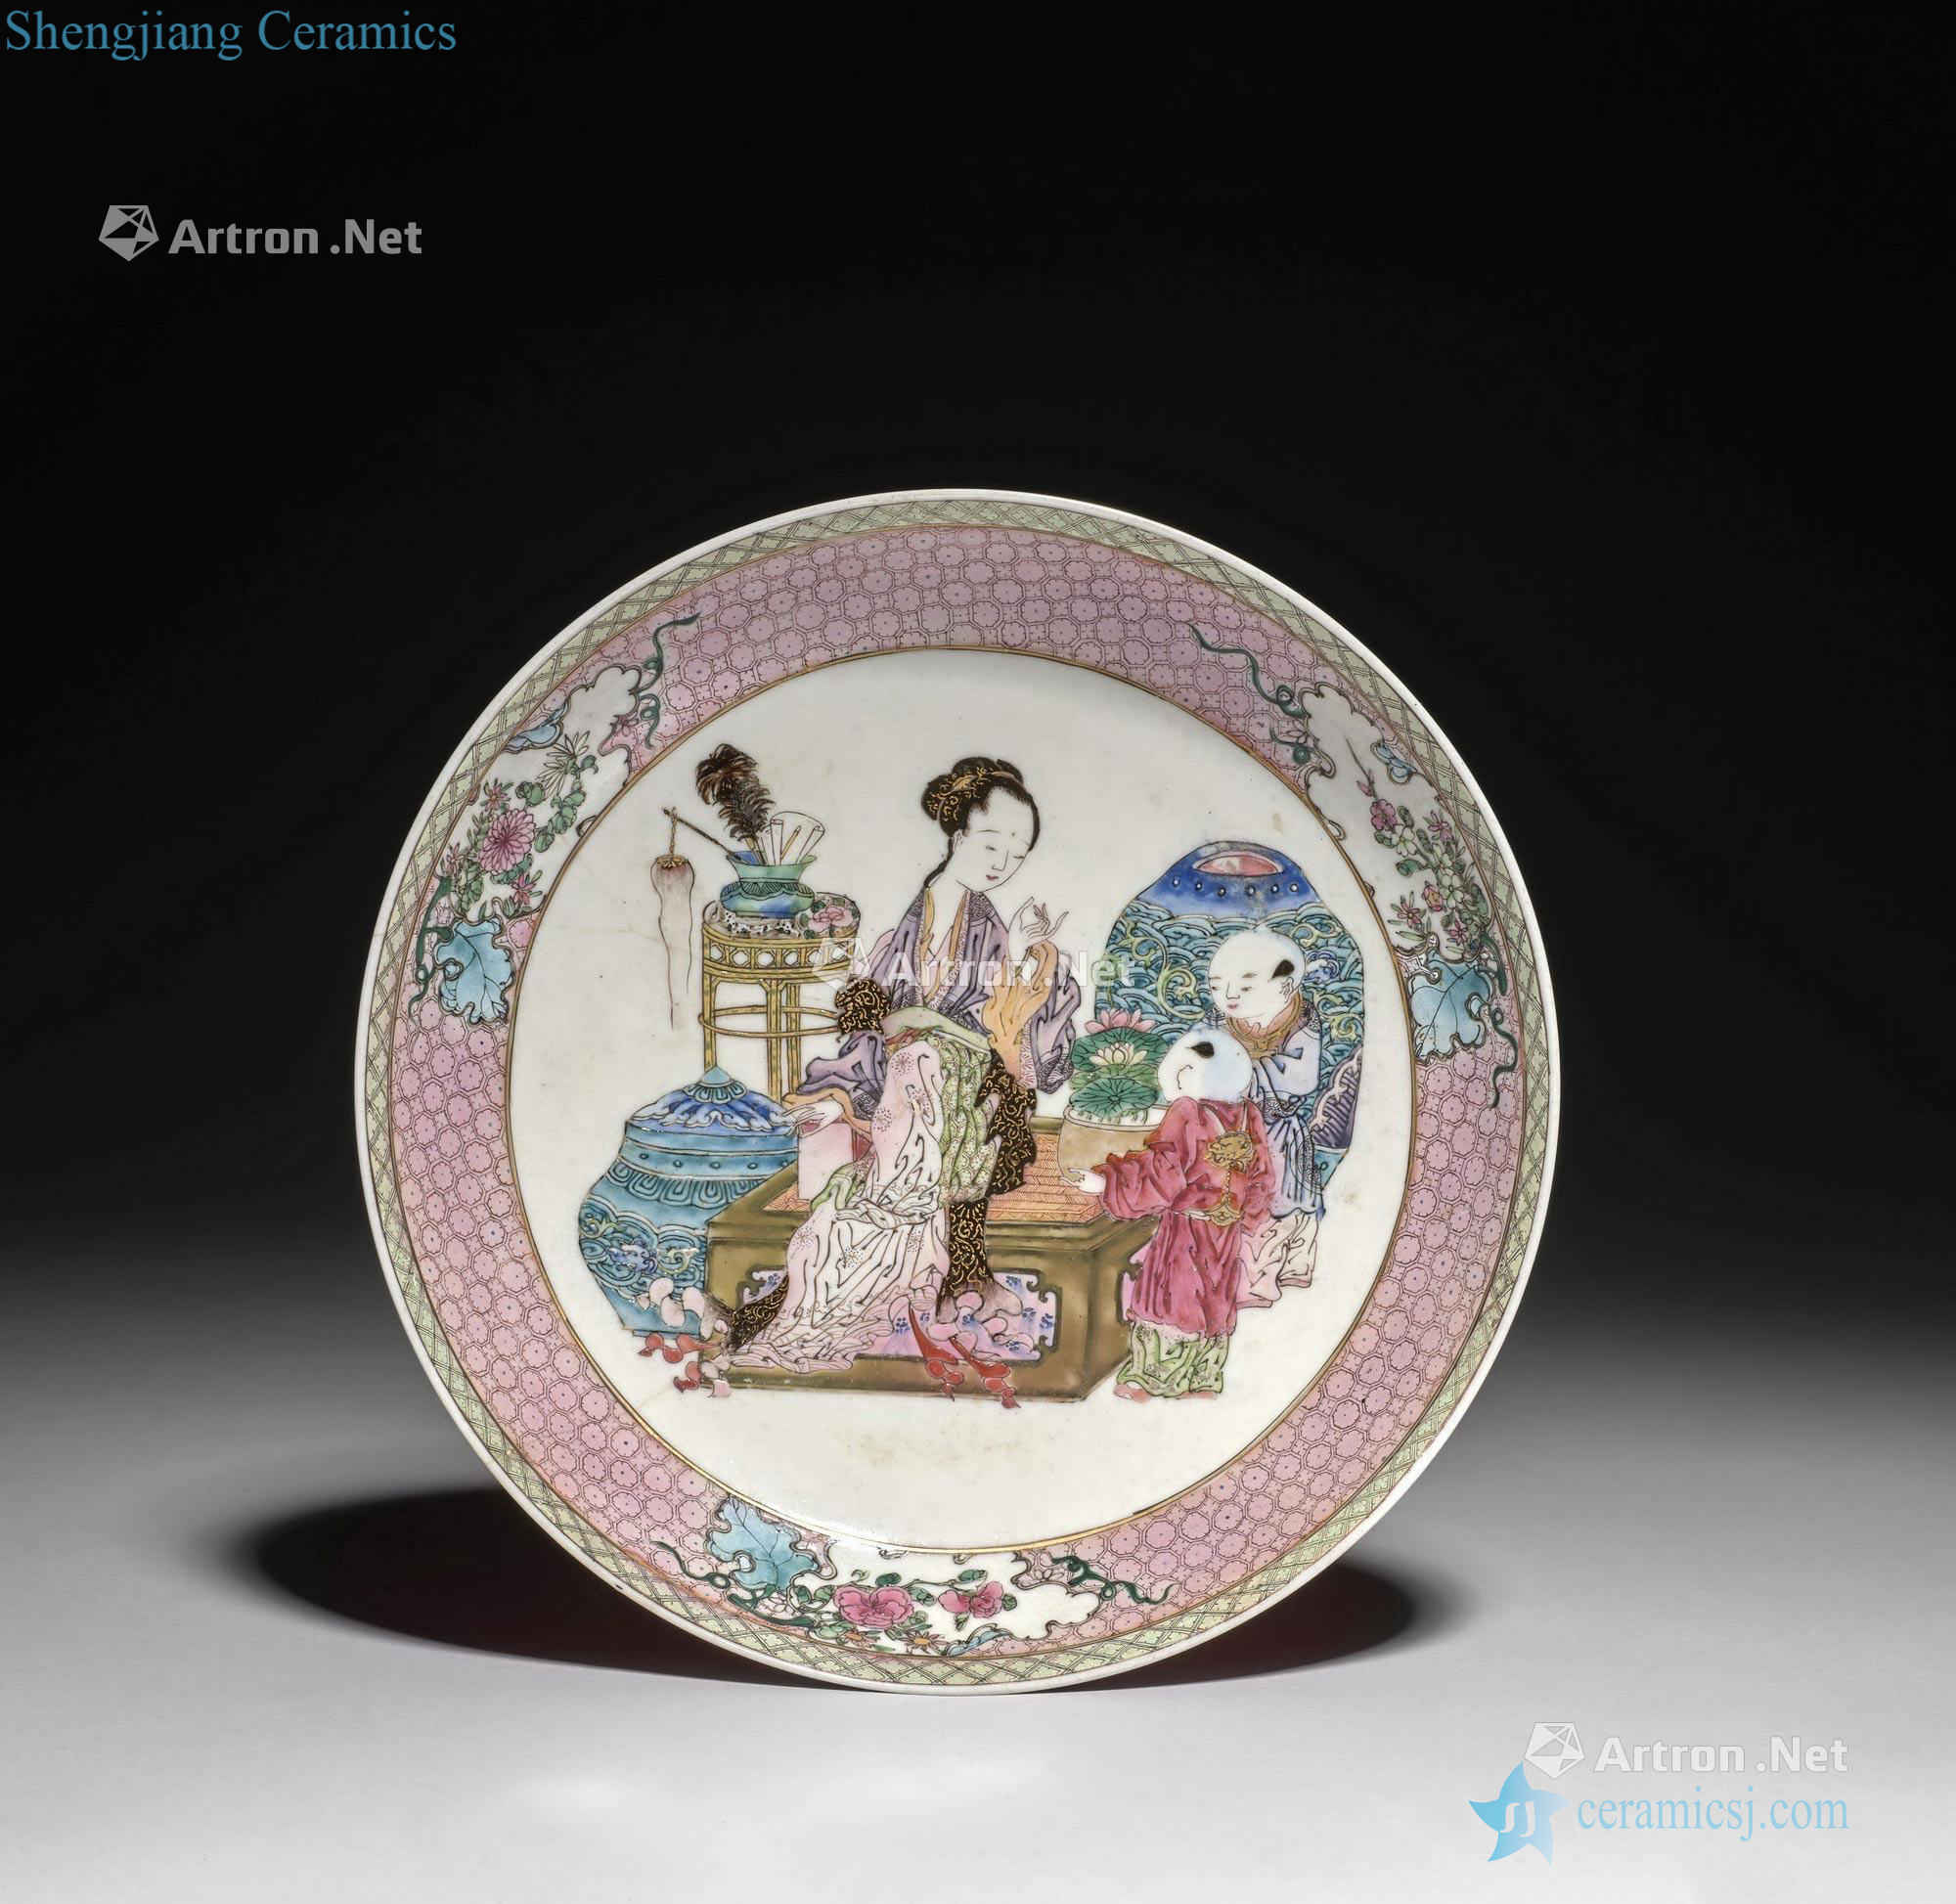 China, the Qing dynasty, the Yongzheng period (1723-1735) A ruby back famille rose porcelain saucer